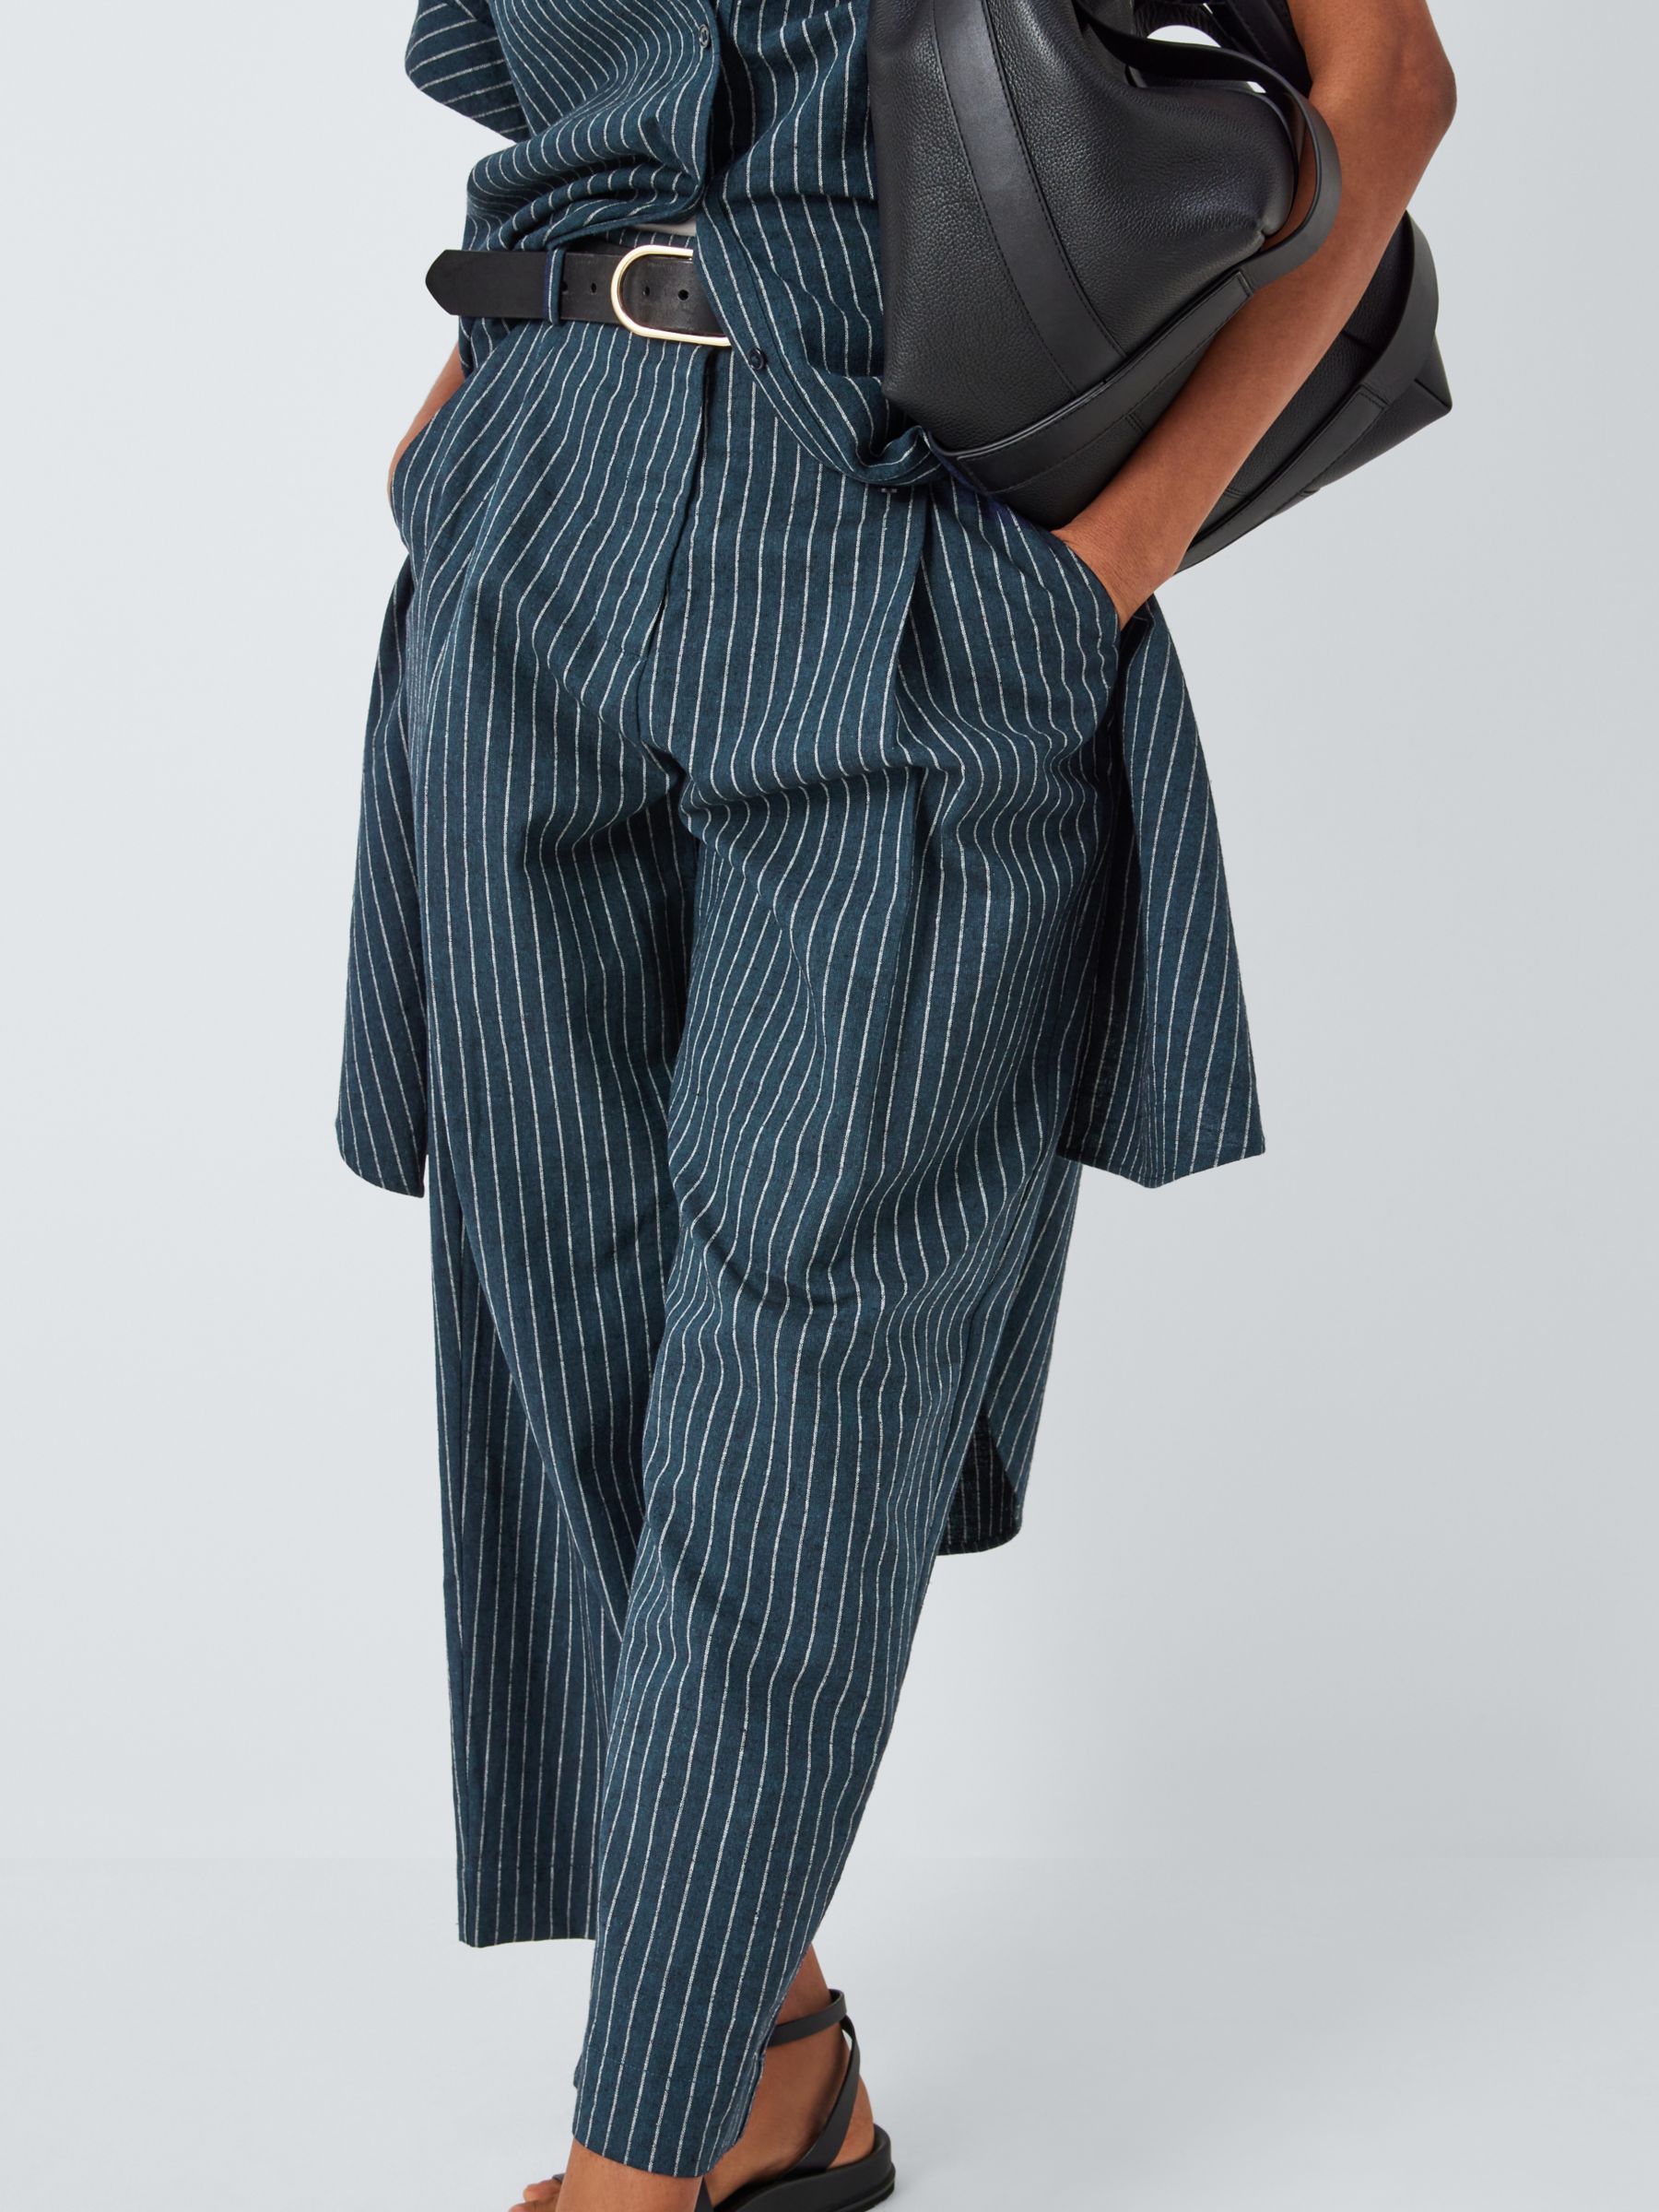 Buy John Lewis Stripe Linen Cropped Trousers Online at johnlewis.com